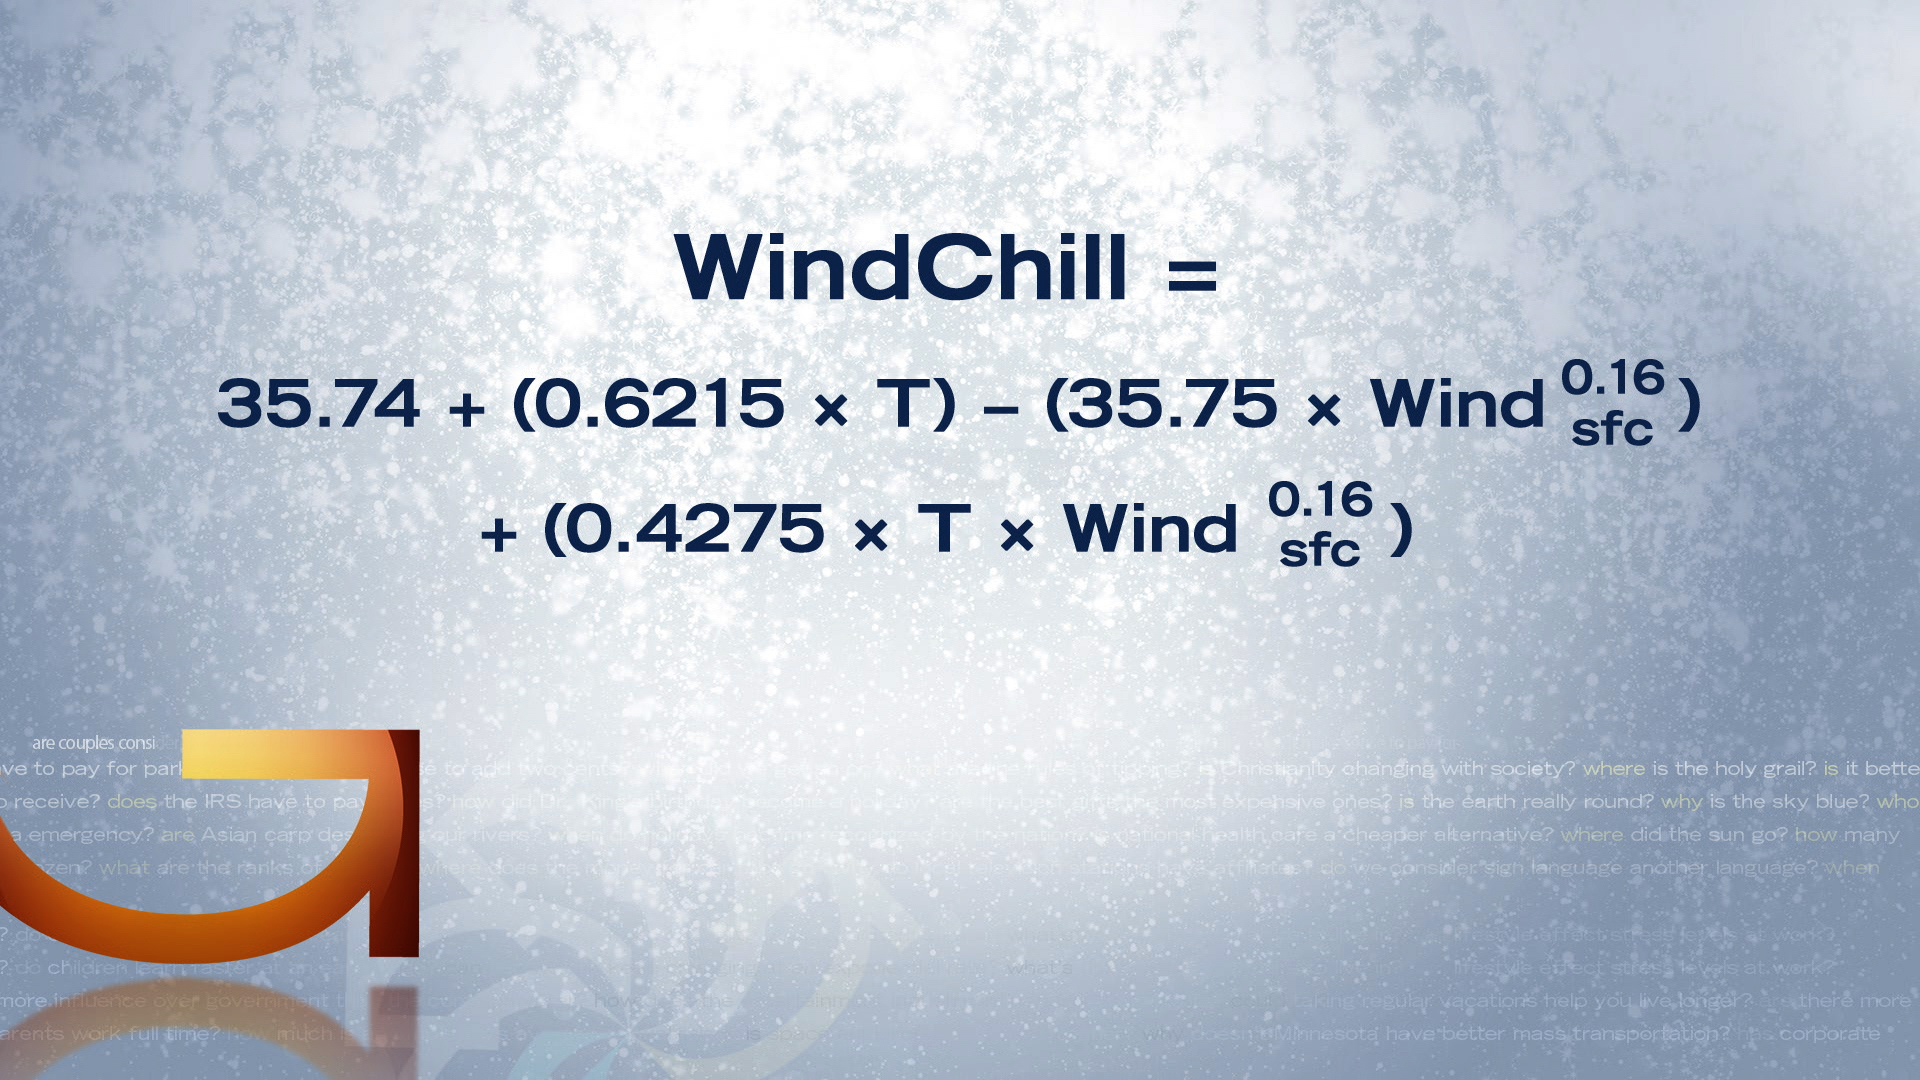 bicycle wind chill chart